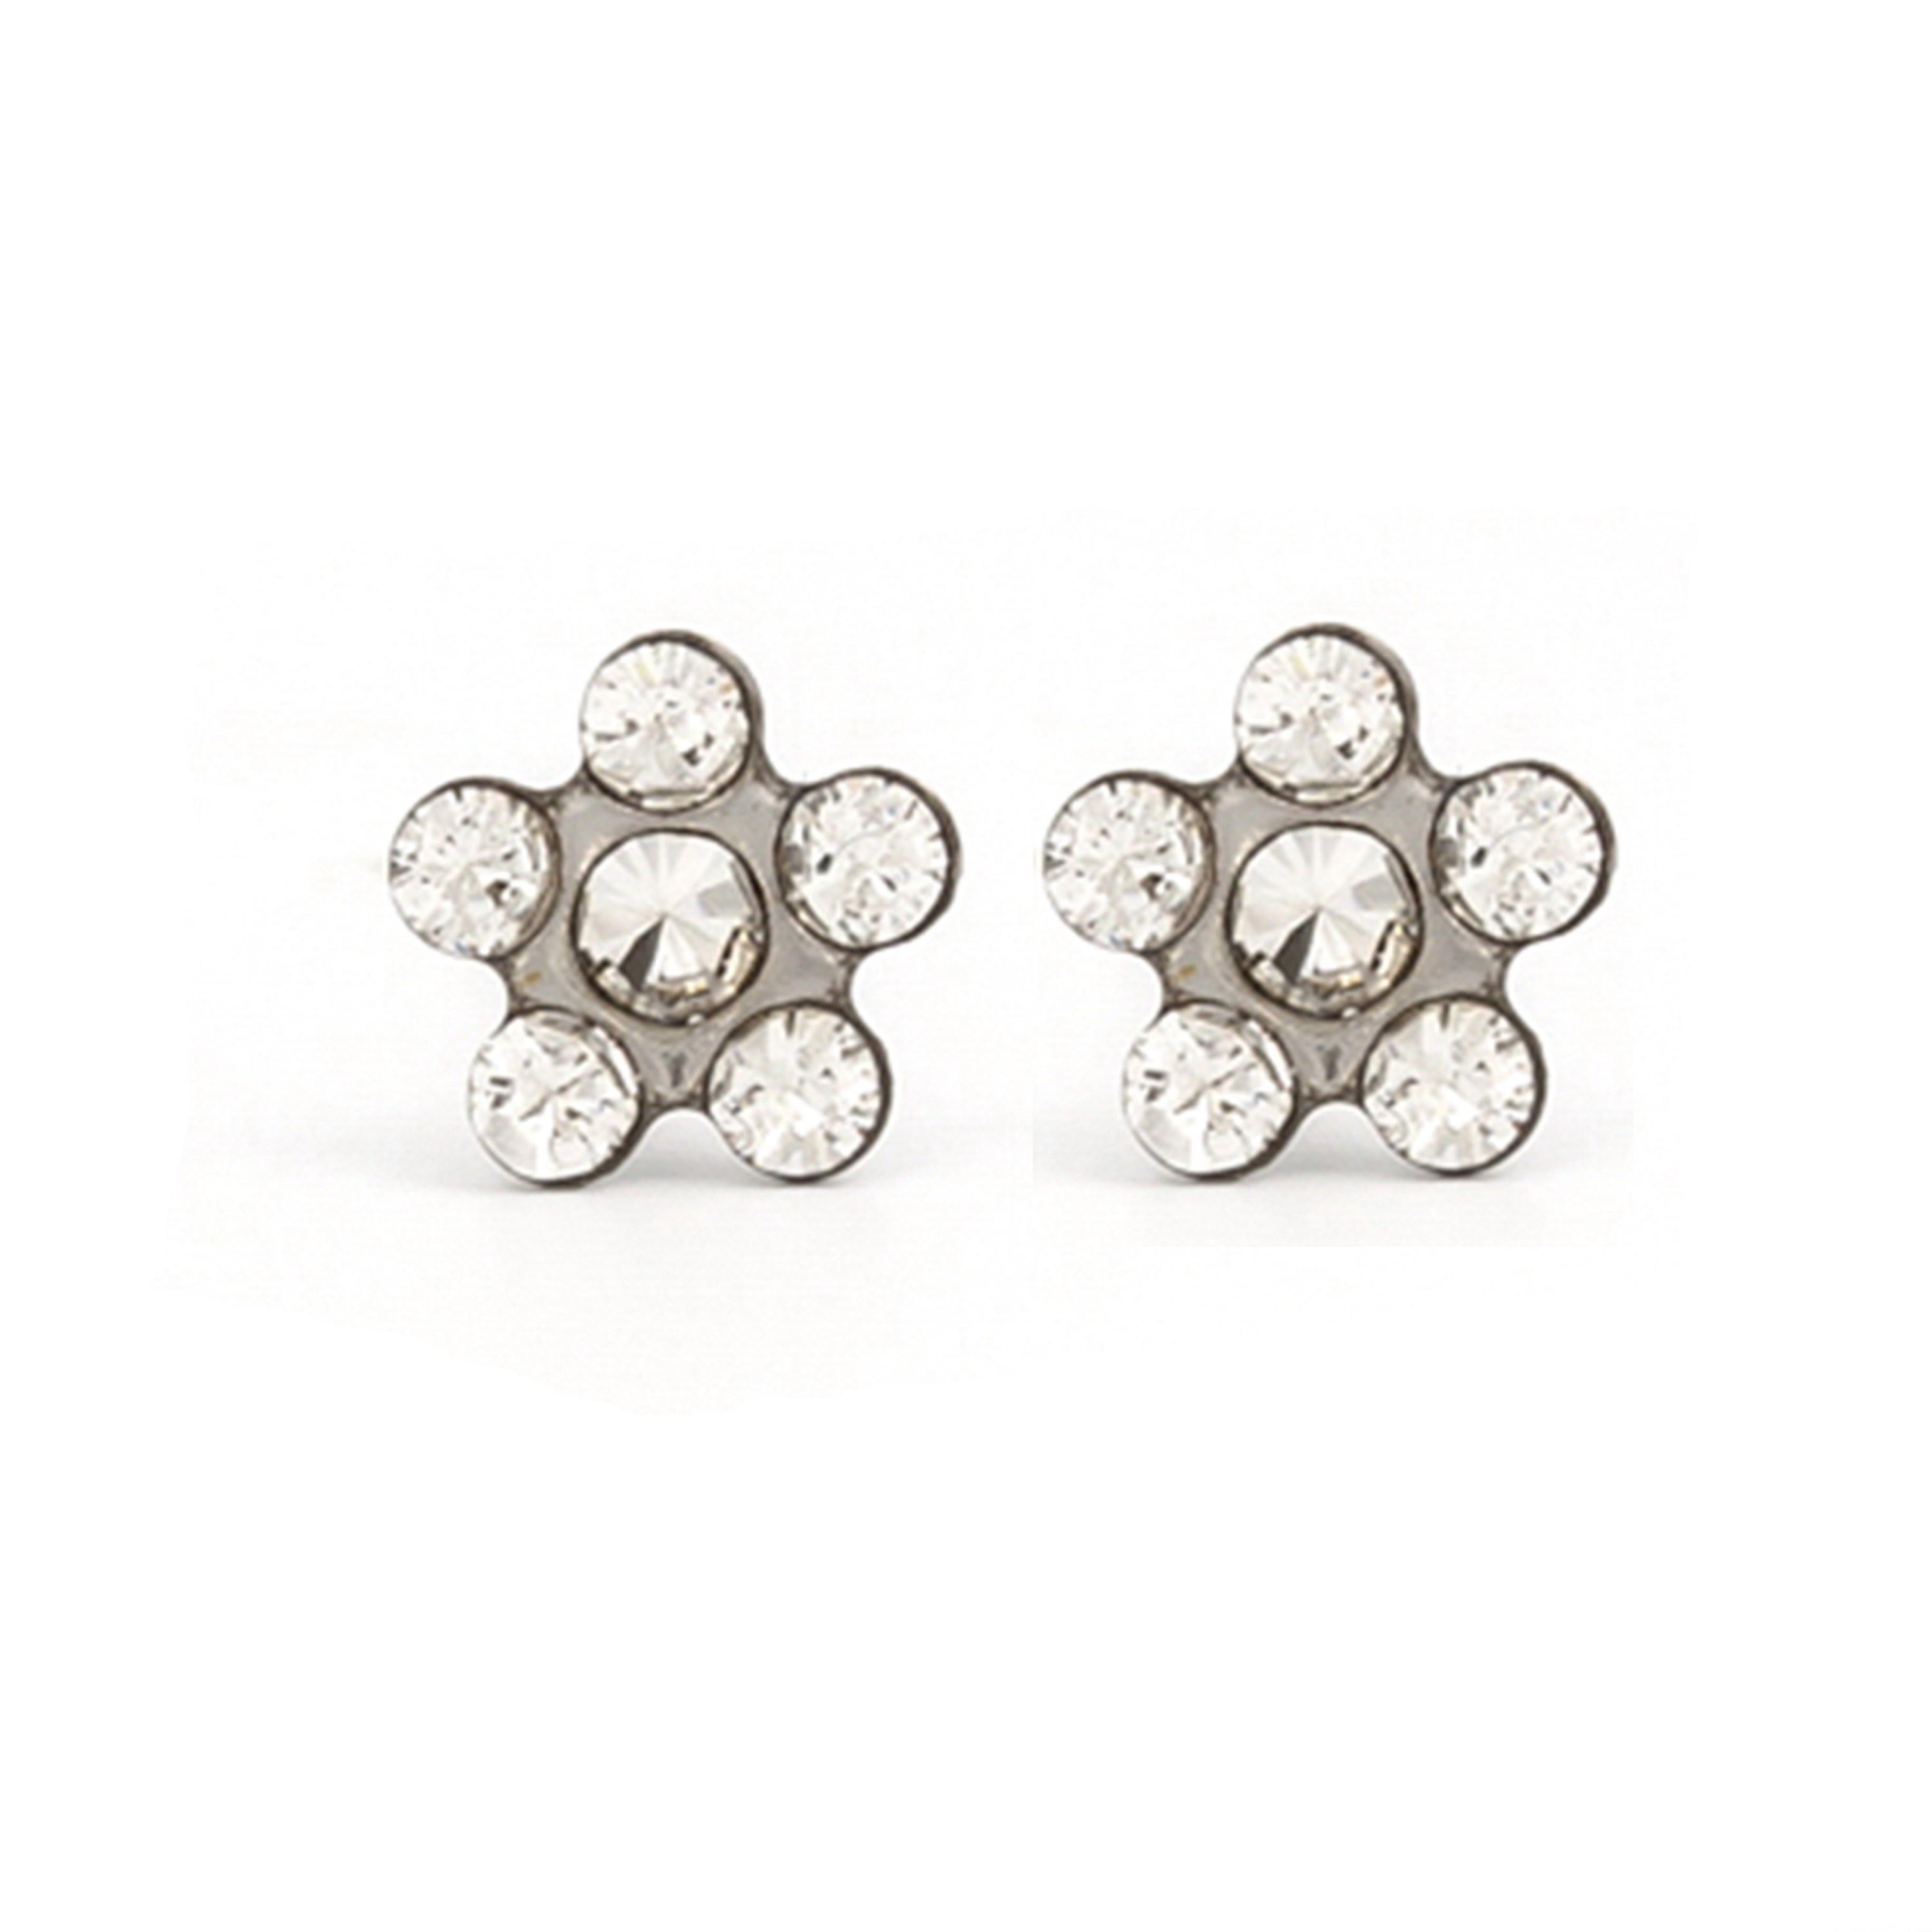 Daisy (Flower) - April Crystal | Stainless Steel Piercing Earrings with Ear Piercing Cartridge | Studex System75